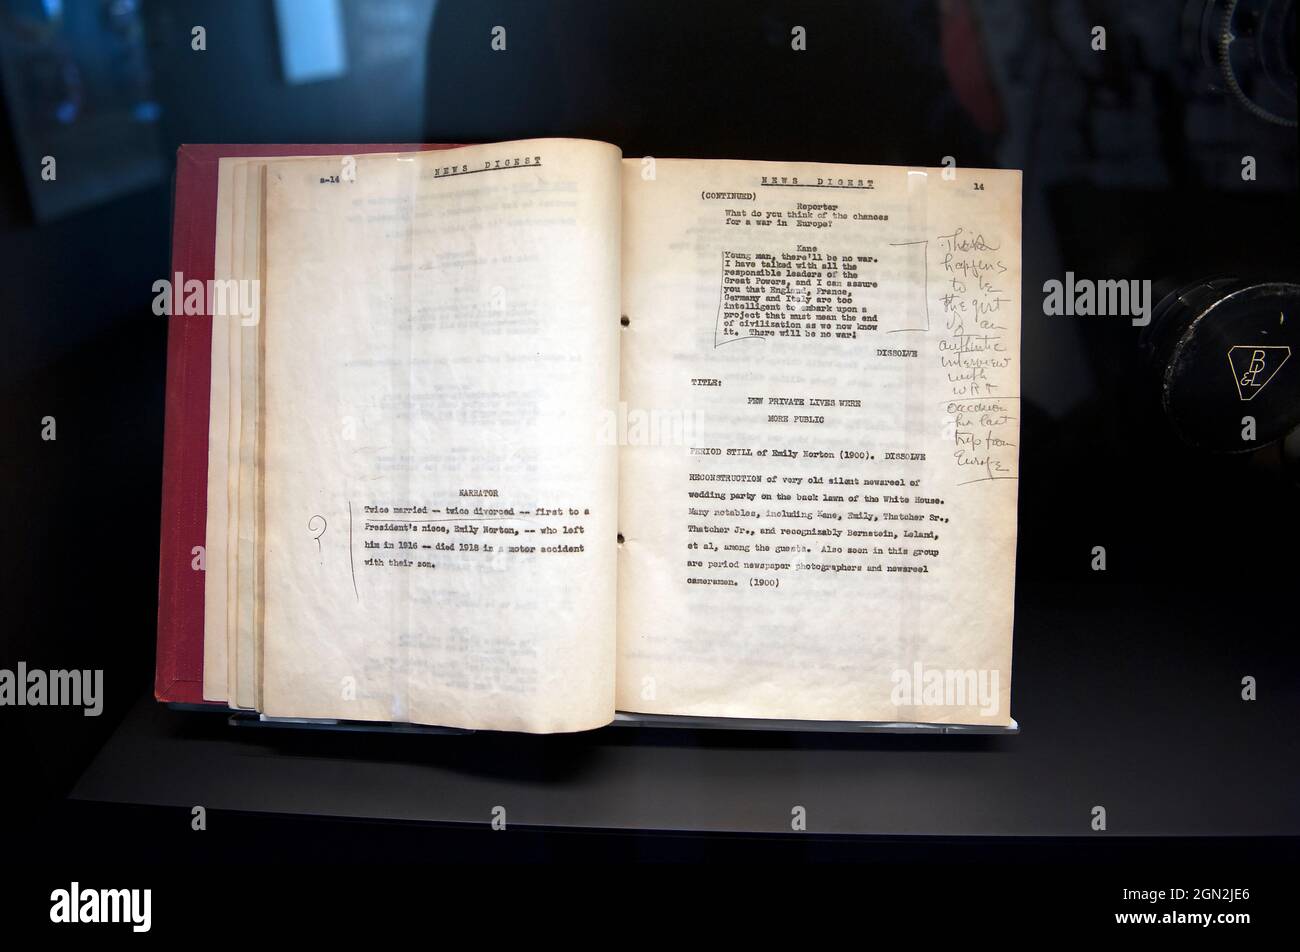 Script from the movie Citizen Kane on display at the Academy Museum of Motion Pictures, Los Angeles, California Stock Photo